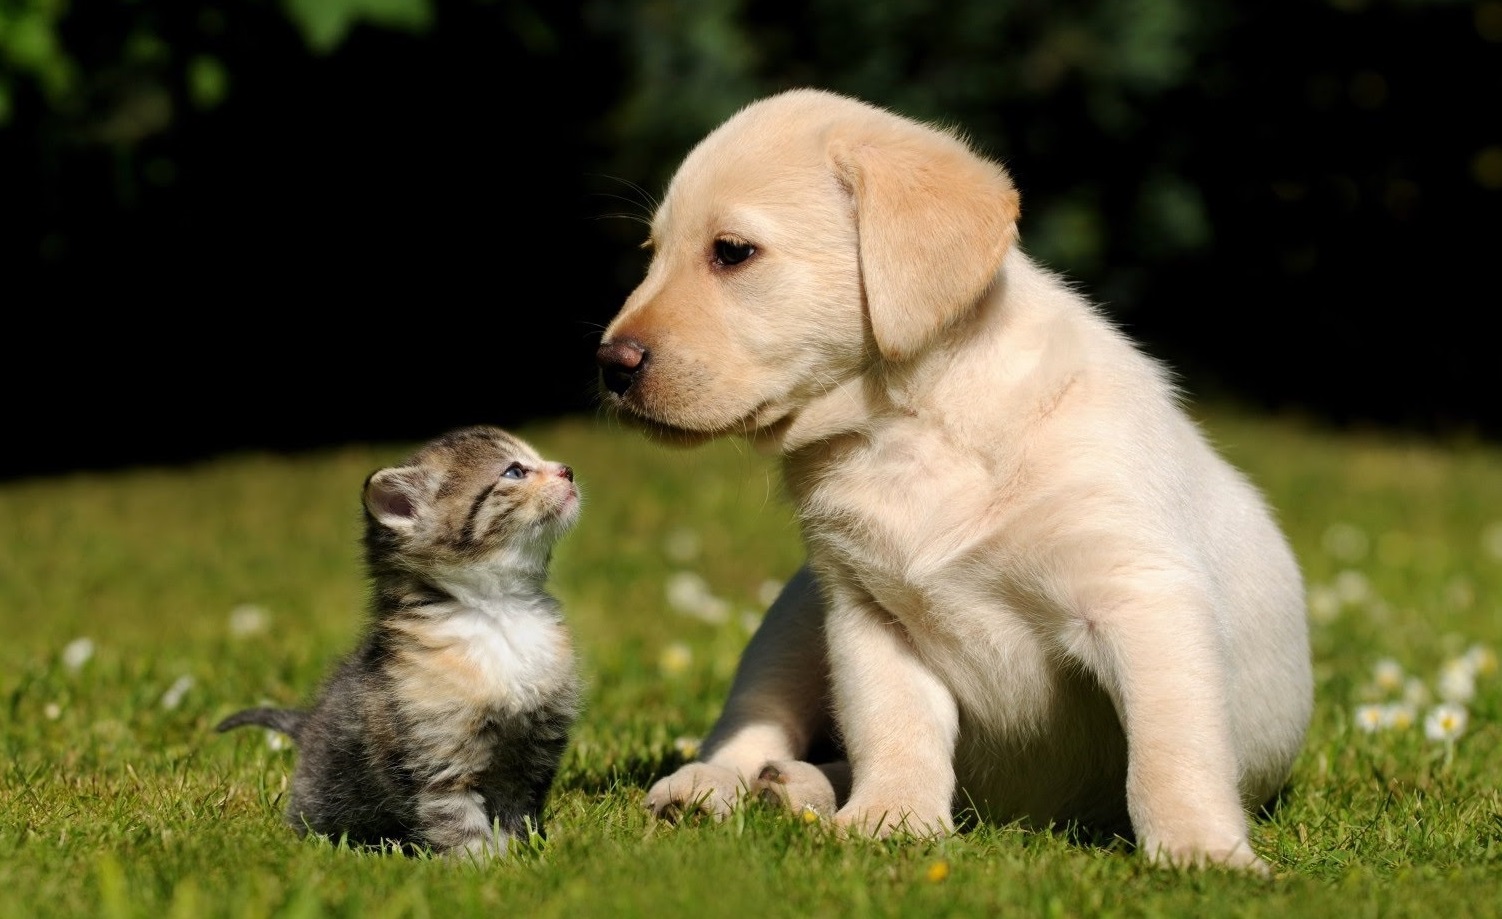 Knowing Your Pet’s Special Breed & Genetics with Exceptional DNA Tests